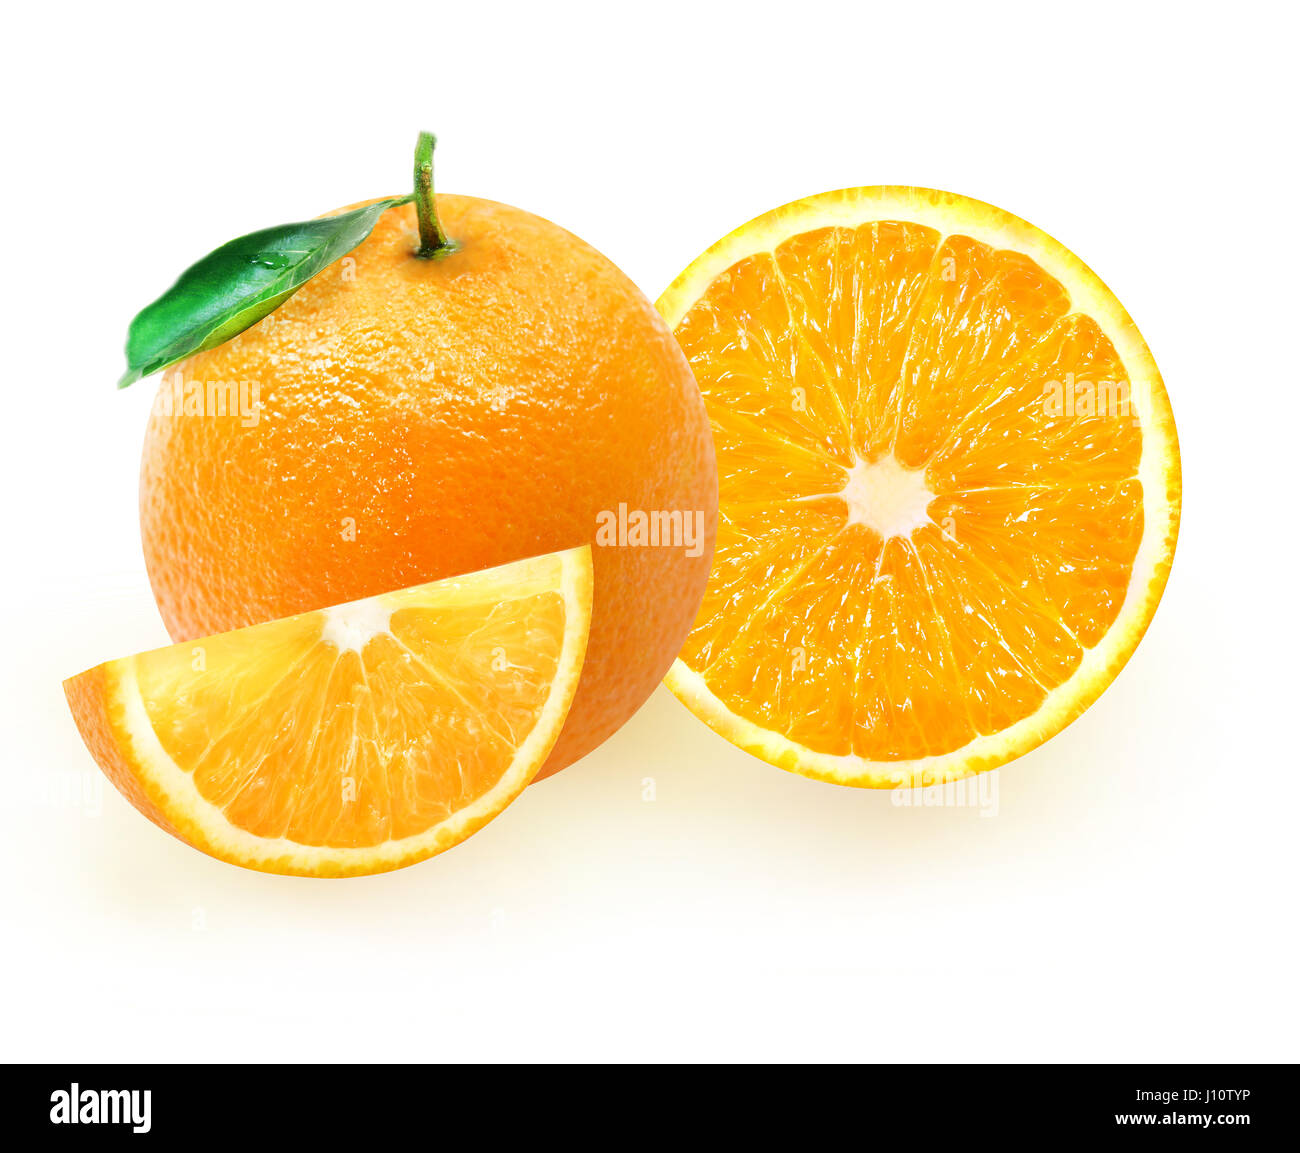 Isolated Oranges Collection Of Whole And Sliced Orange Fruits Isolated